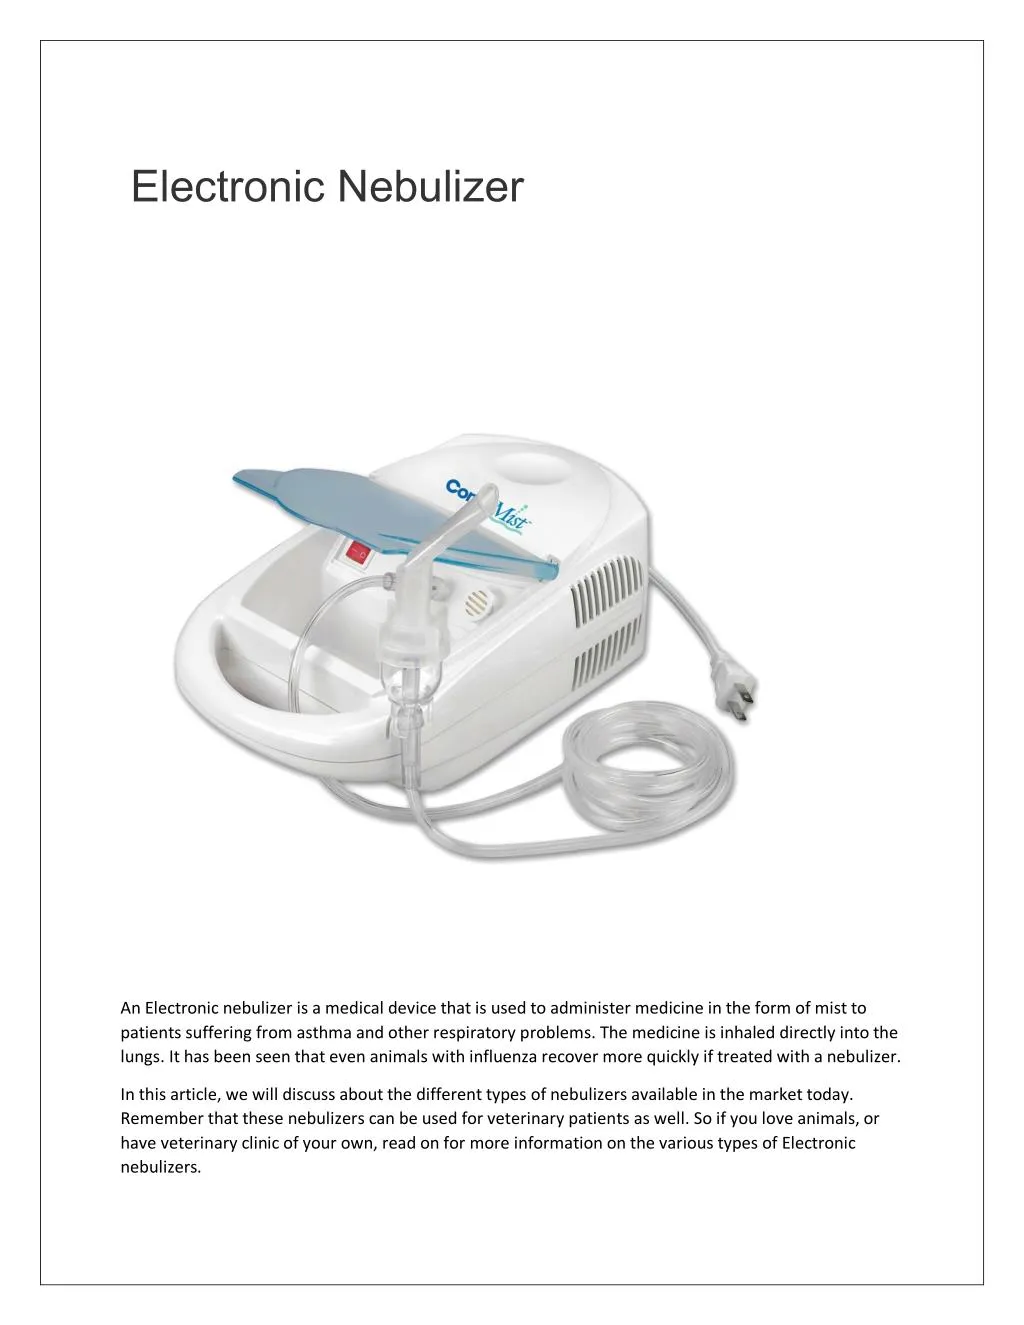 value investing options strategy vios nebulizer